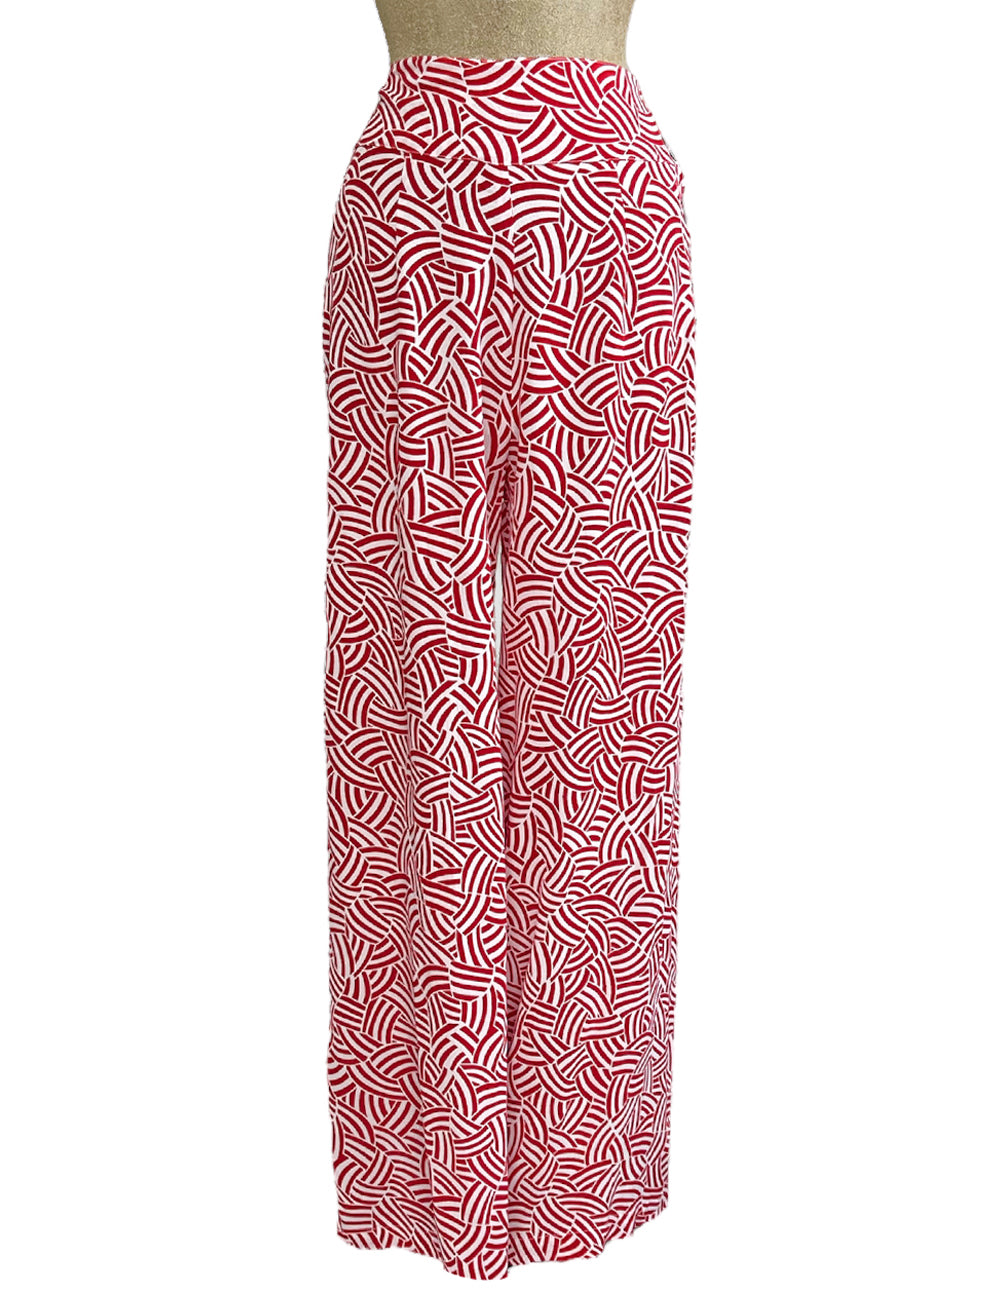 Red & White Deco Waves 1930s Style High Waisted Palazzo Pants